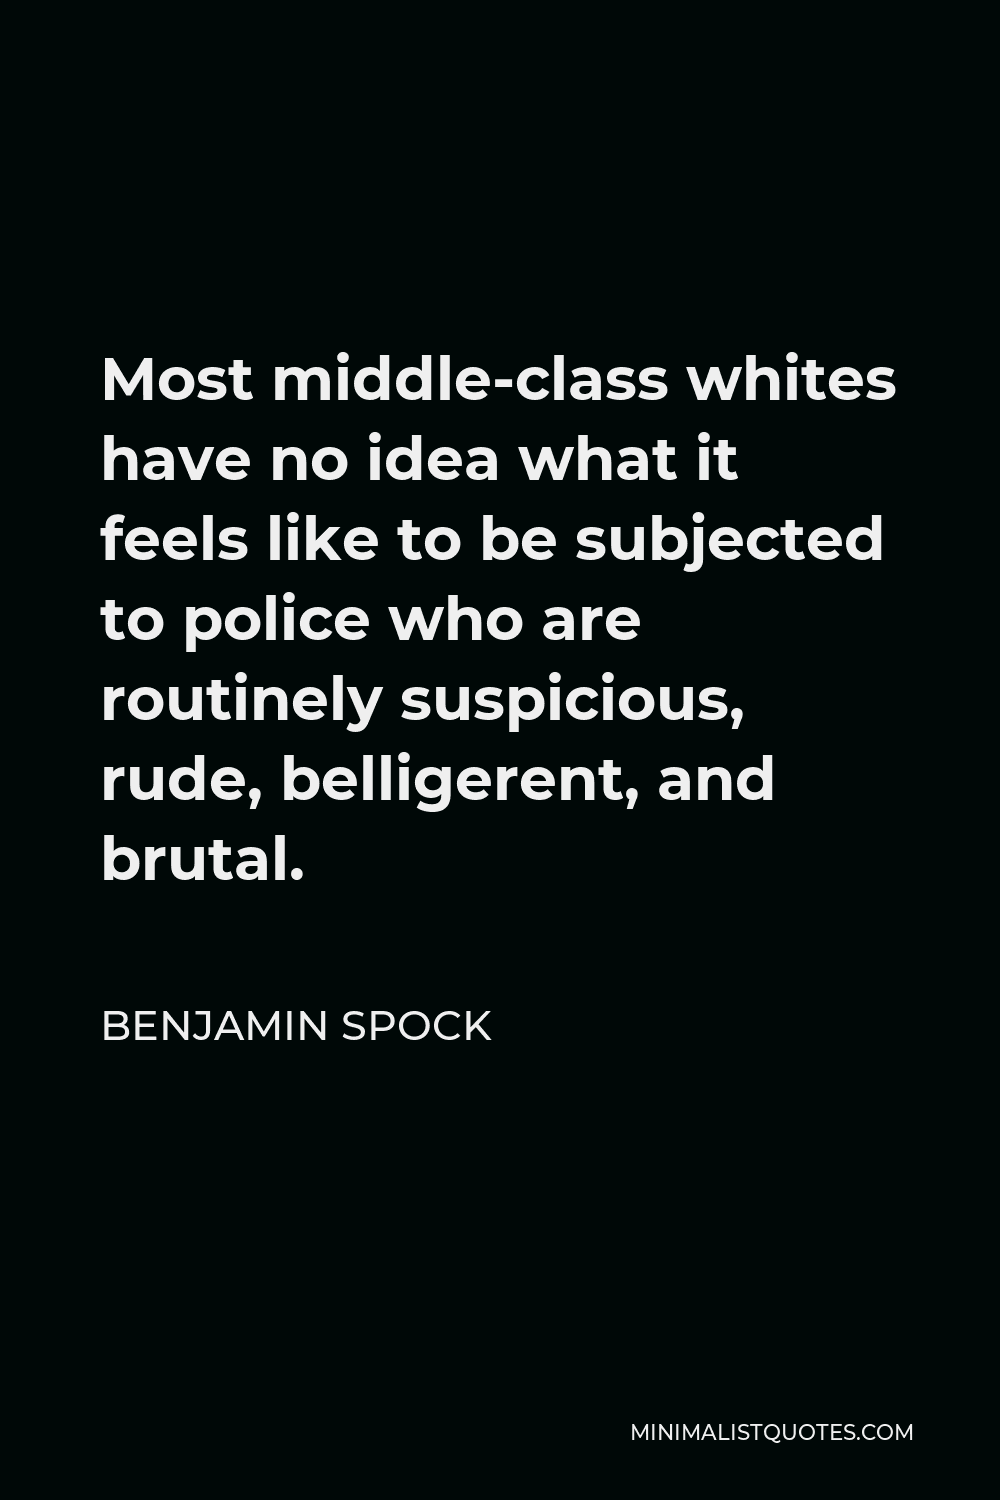 Benjamin Spock Quote - Most middle-class whites have no idea what it feels like to be subjected to police who are routinely suspicious, rude, belligerent, and brutal.